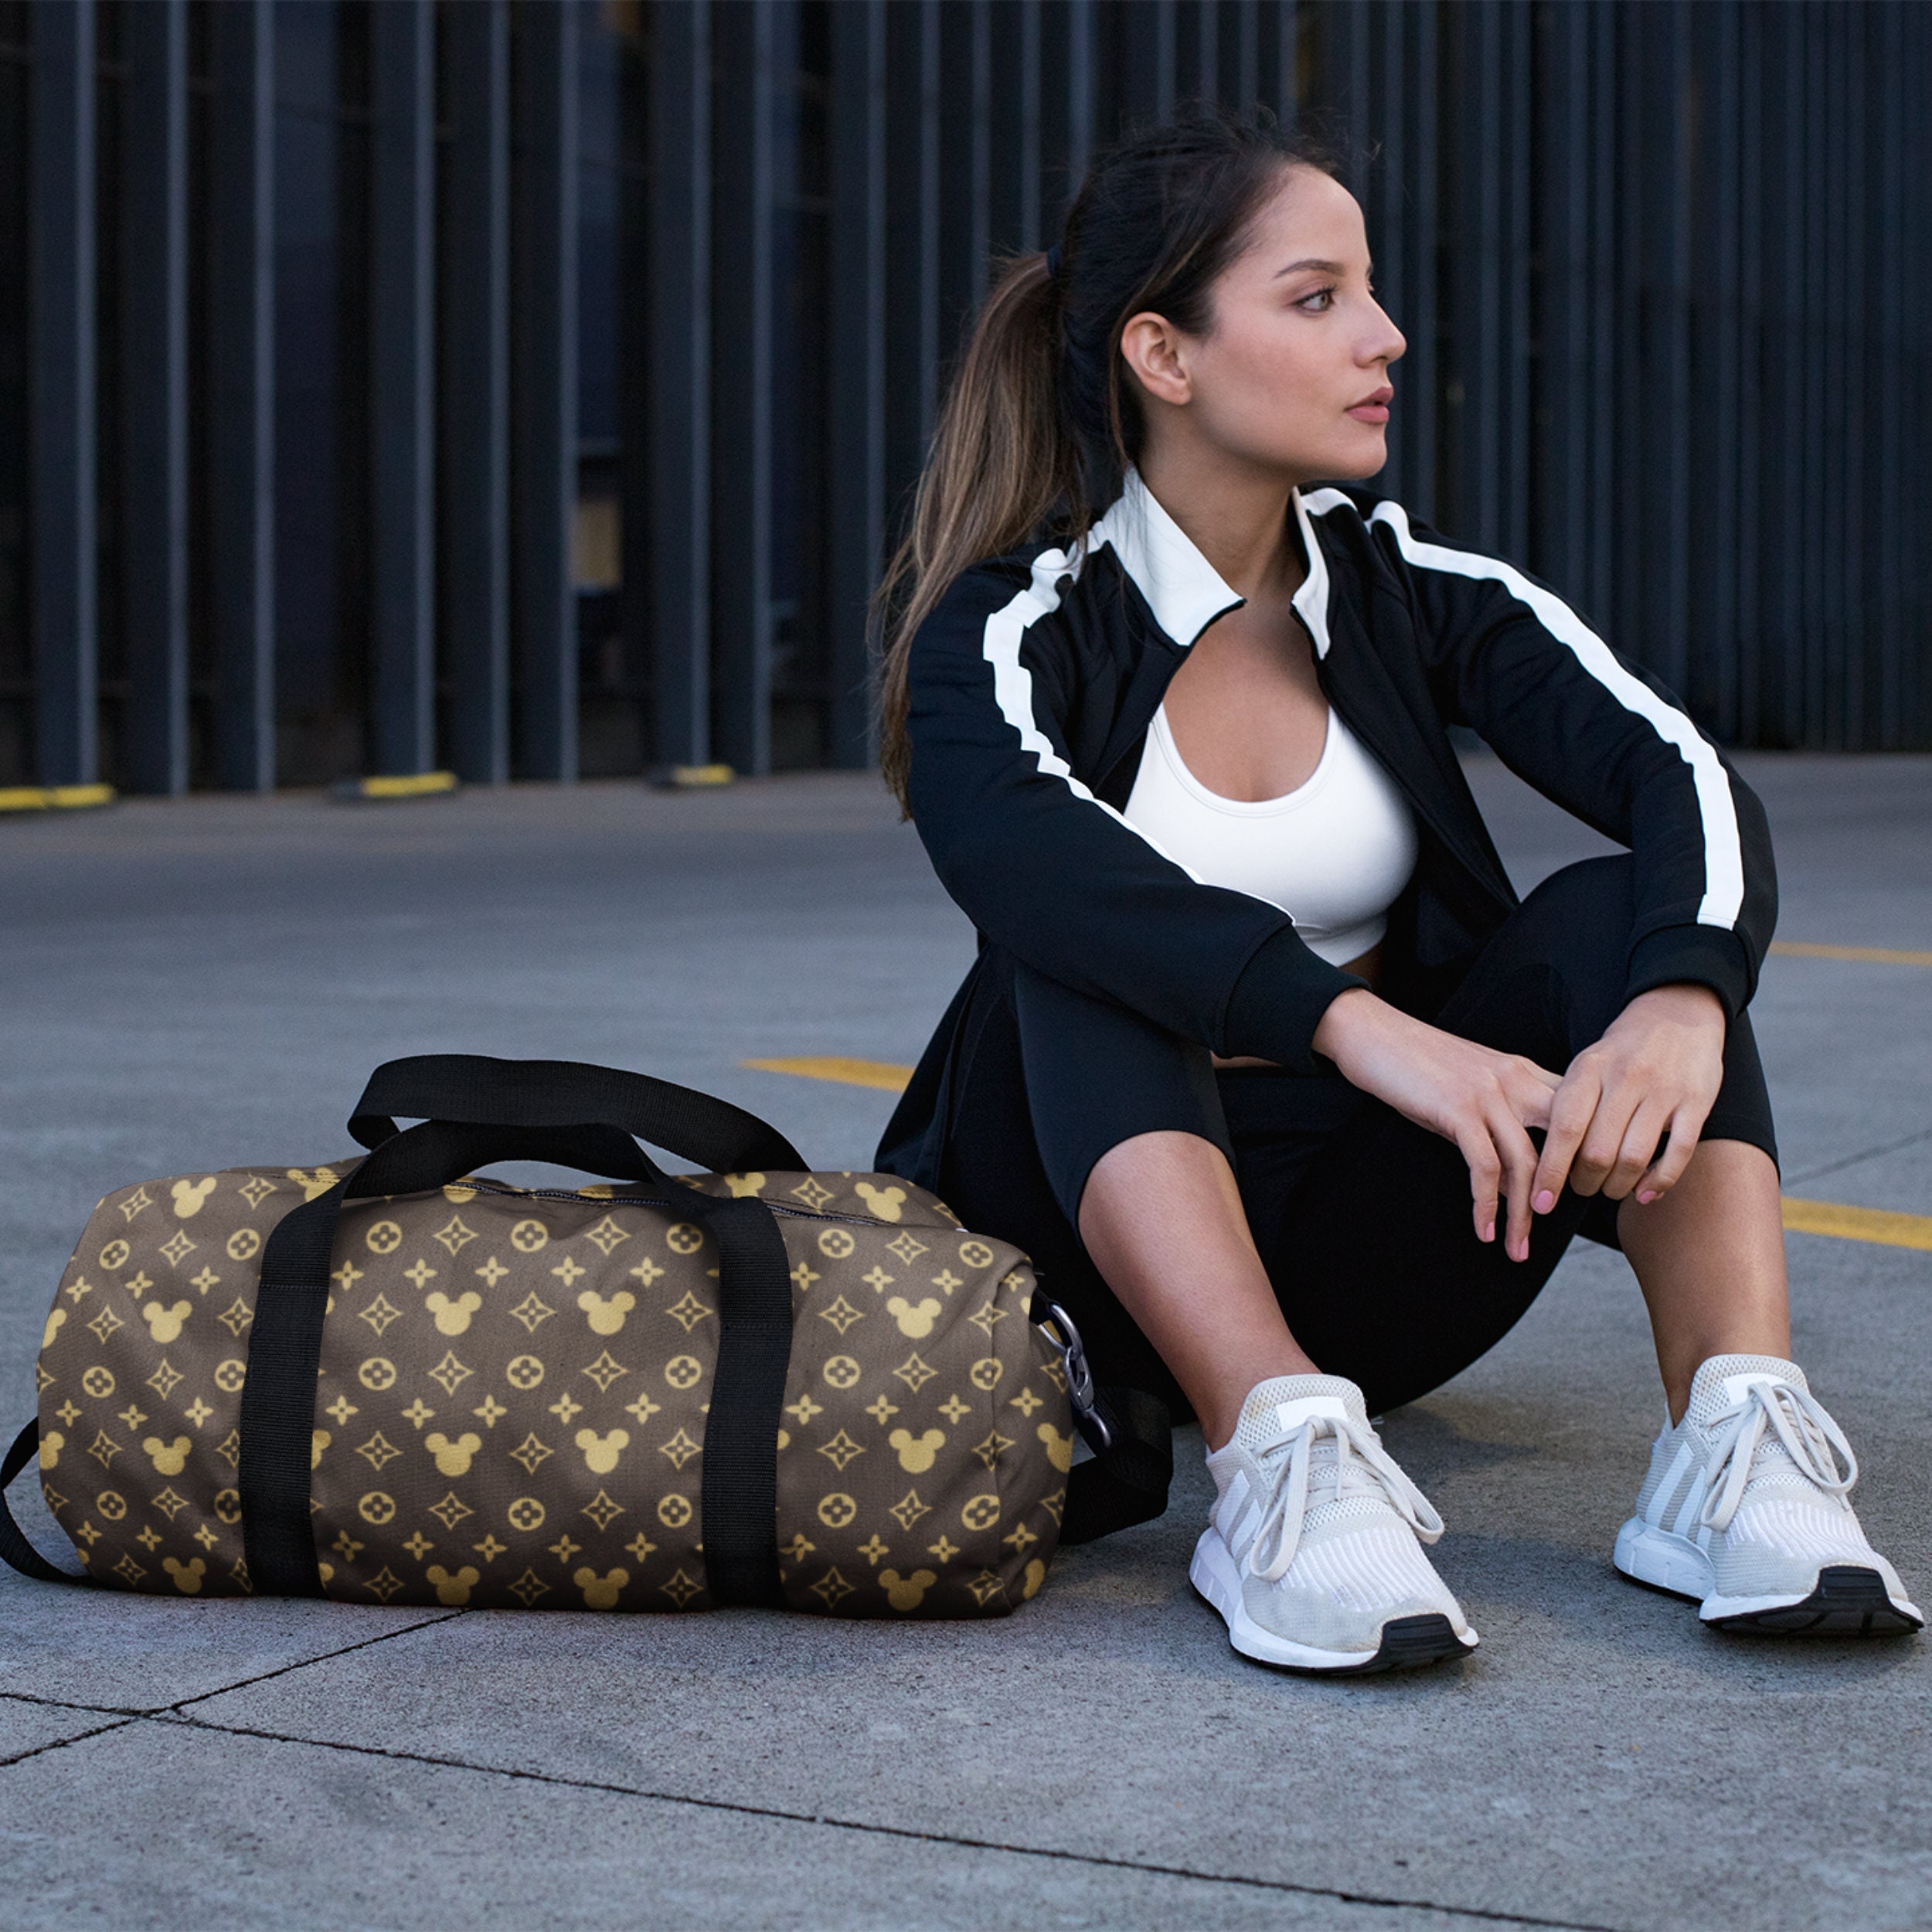 veee.mpire - Louis Vuitton Mickey Mouse Bag ,now available